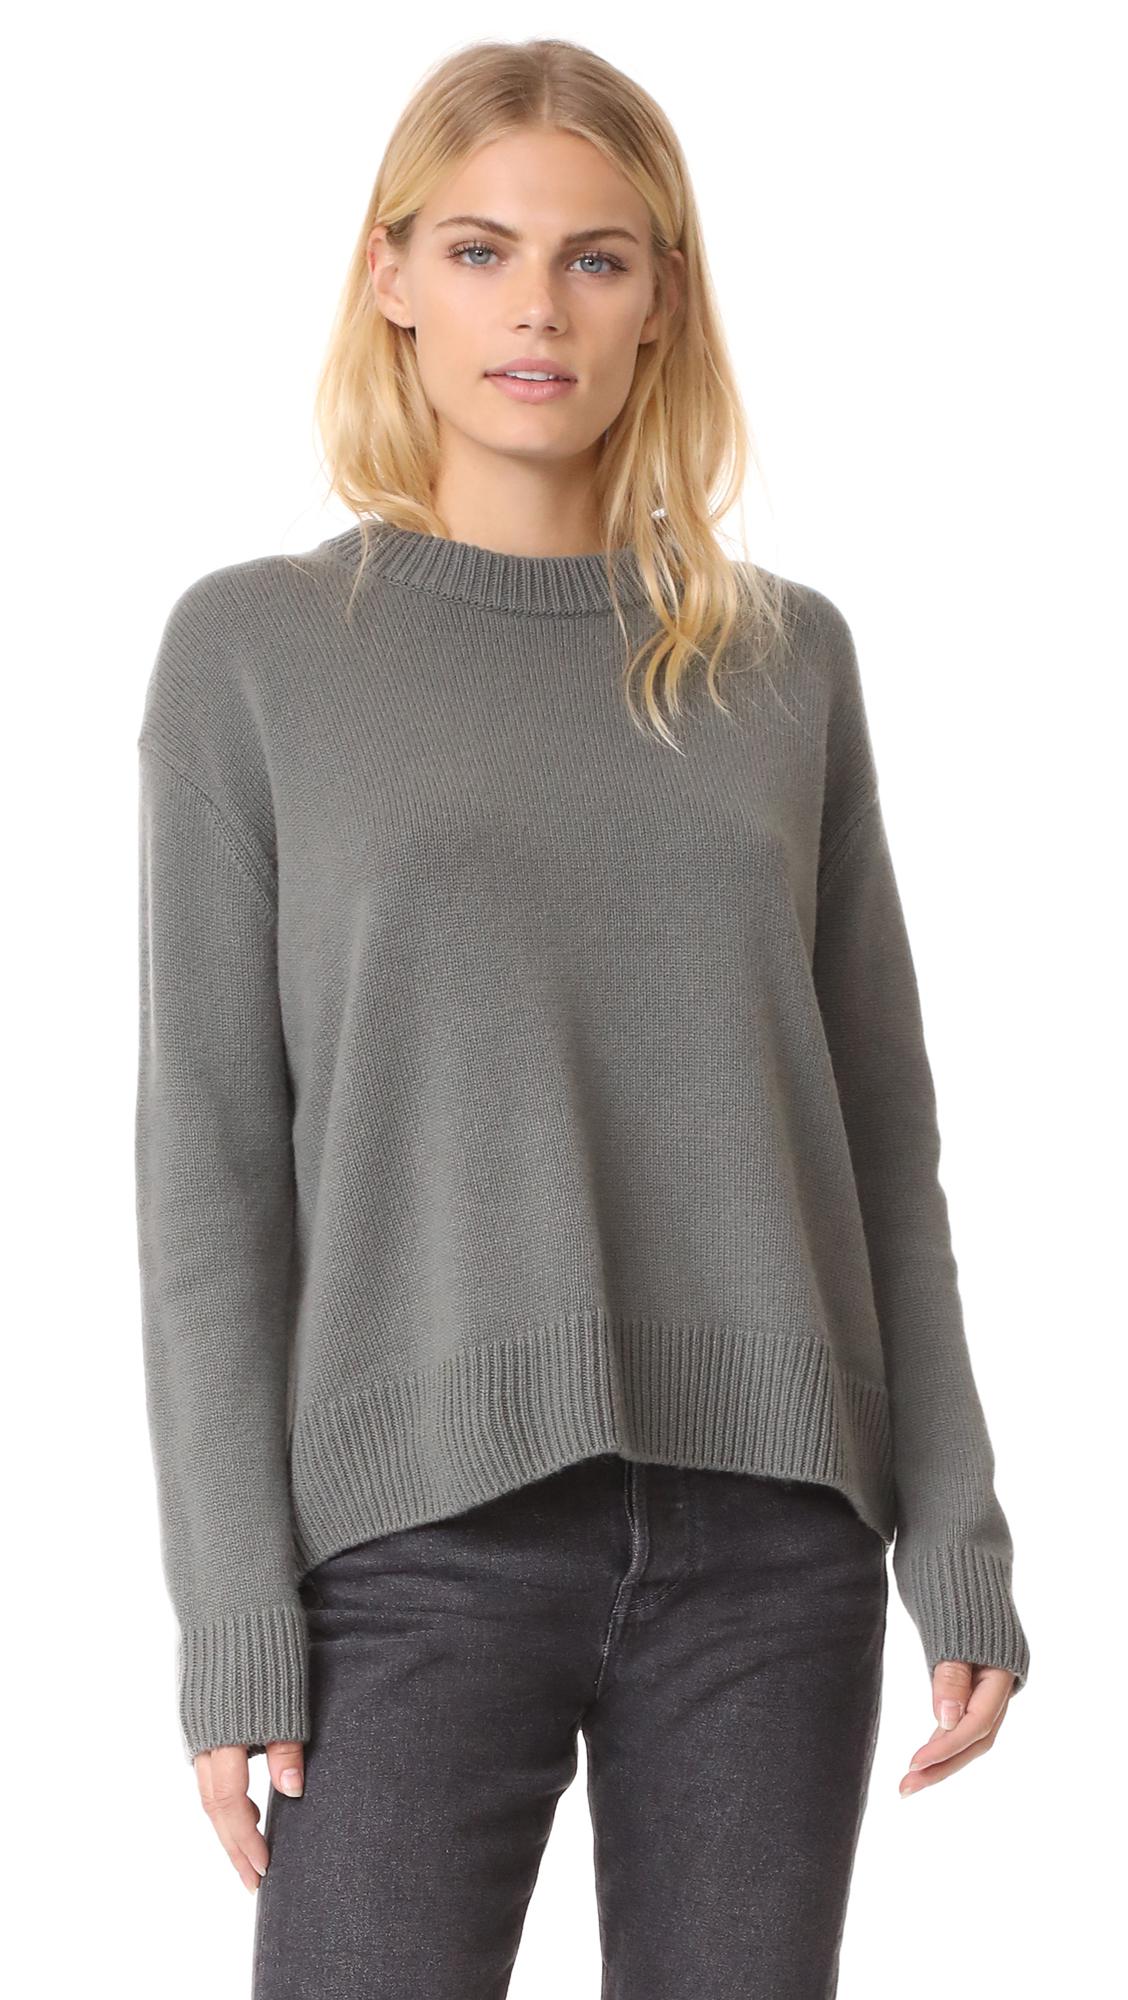 Lyst - Vince Boxy Cashmere Sweater in Gray